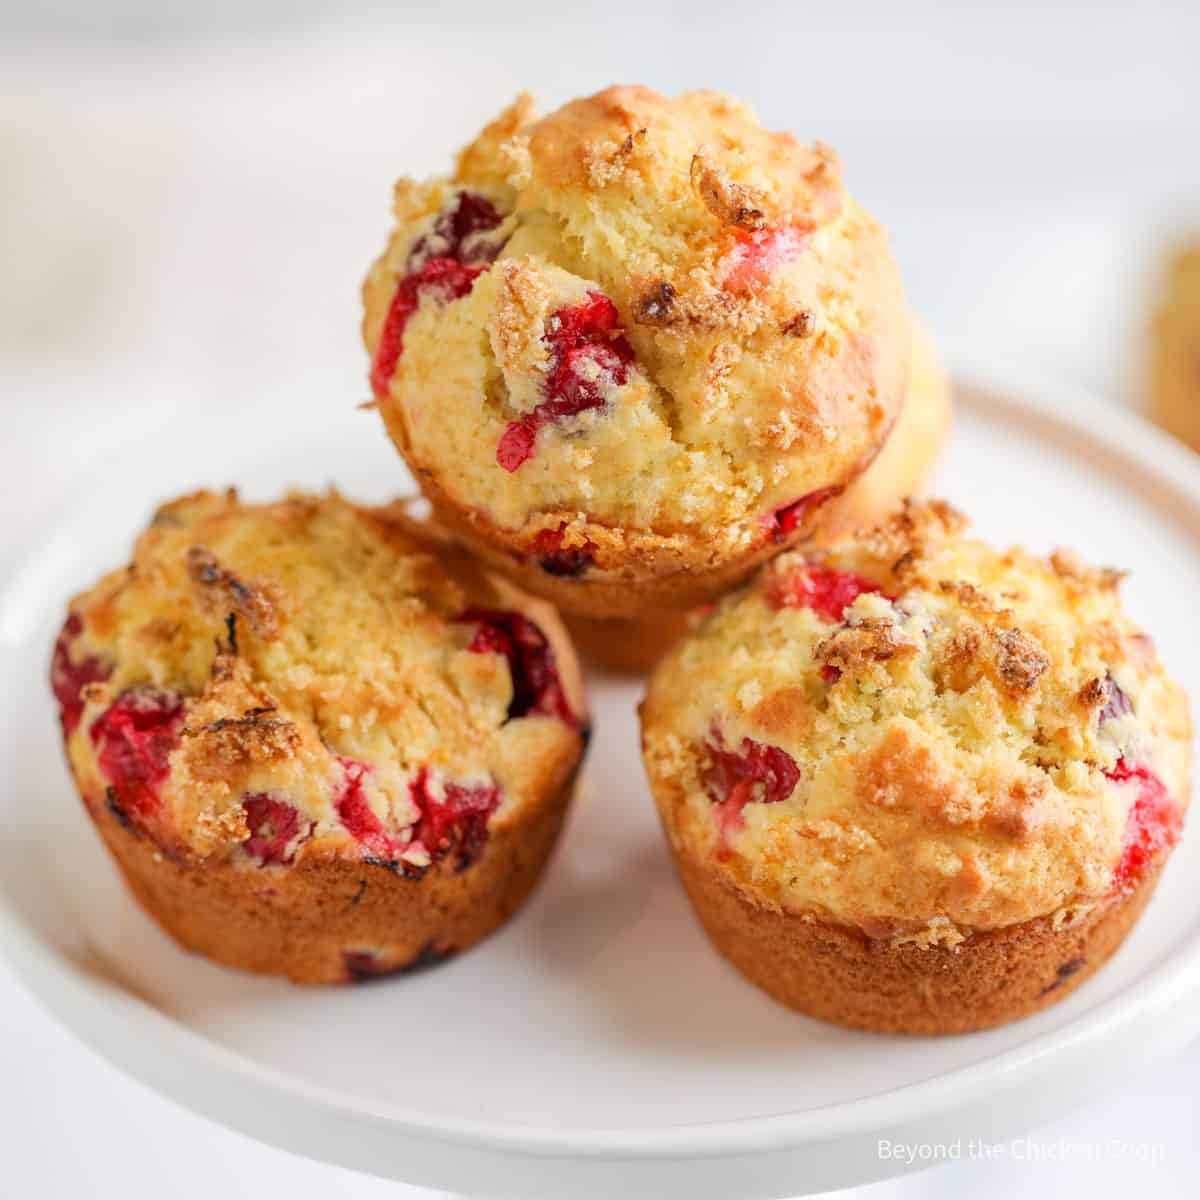 Three cranberry muffins on a plate.